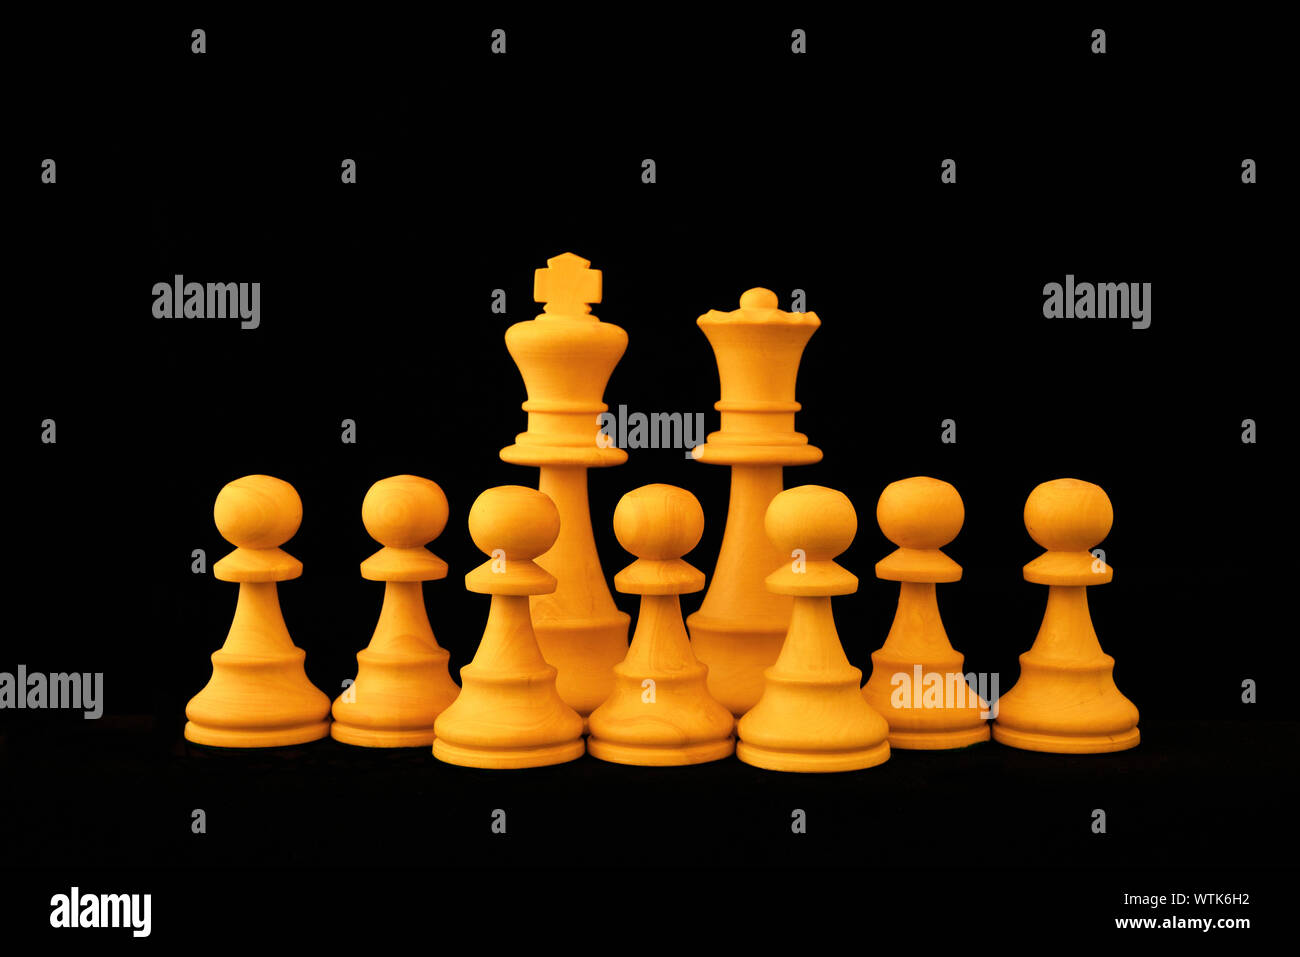 White King, Queen and numeorus Pawn as large family and fertility concept. Standard chess wooden pieces on black background Stock Photo